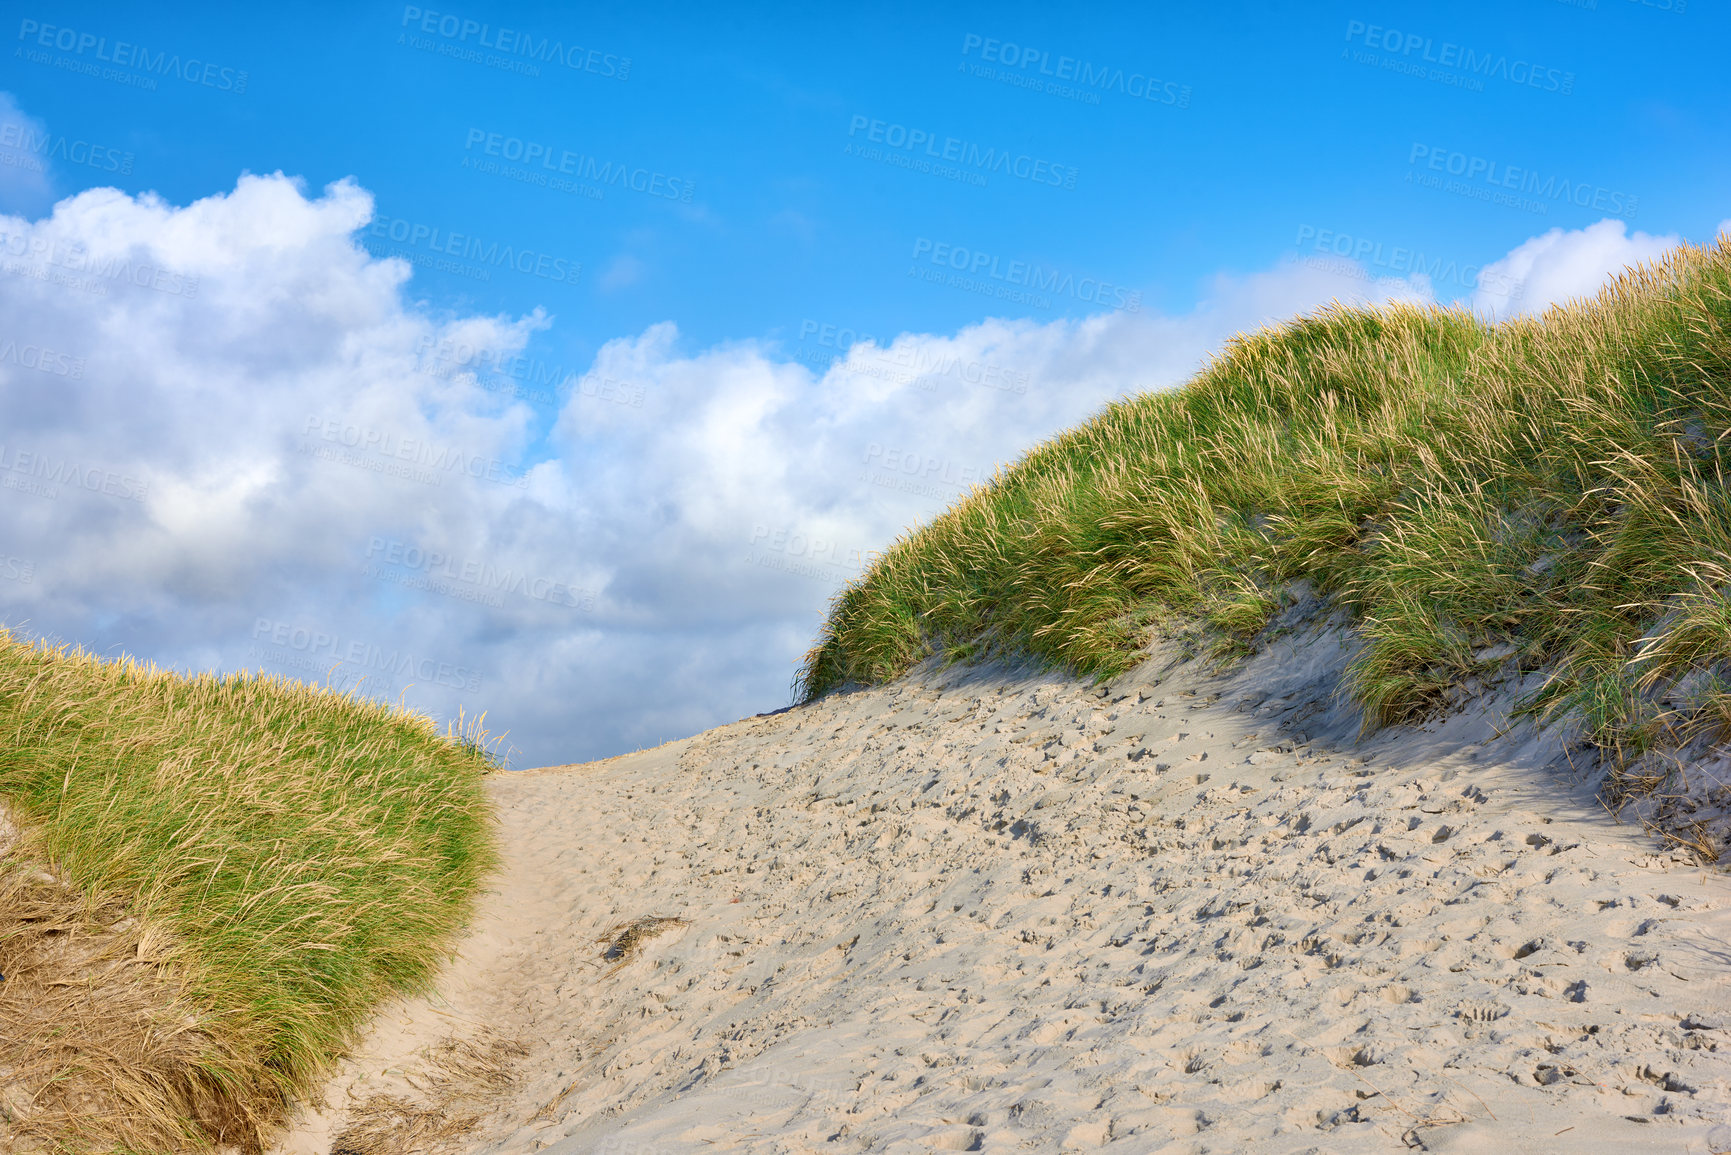 Buy stock photo Closeup of a sand path with lush green grass growing on a beach with cloudy copy space. Beautiful blue sky on a warm and sunny summer day over a dry and sandy dune situated on a coastline bay area